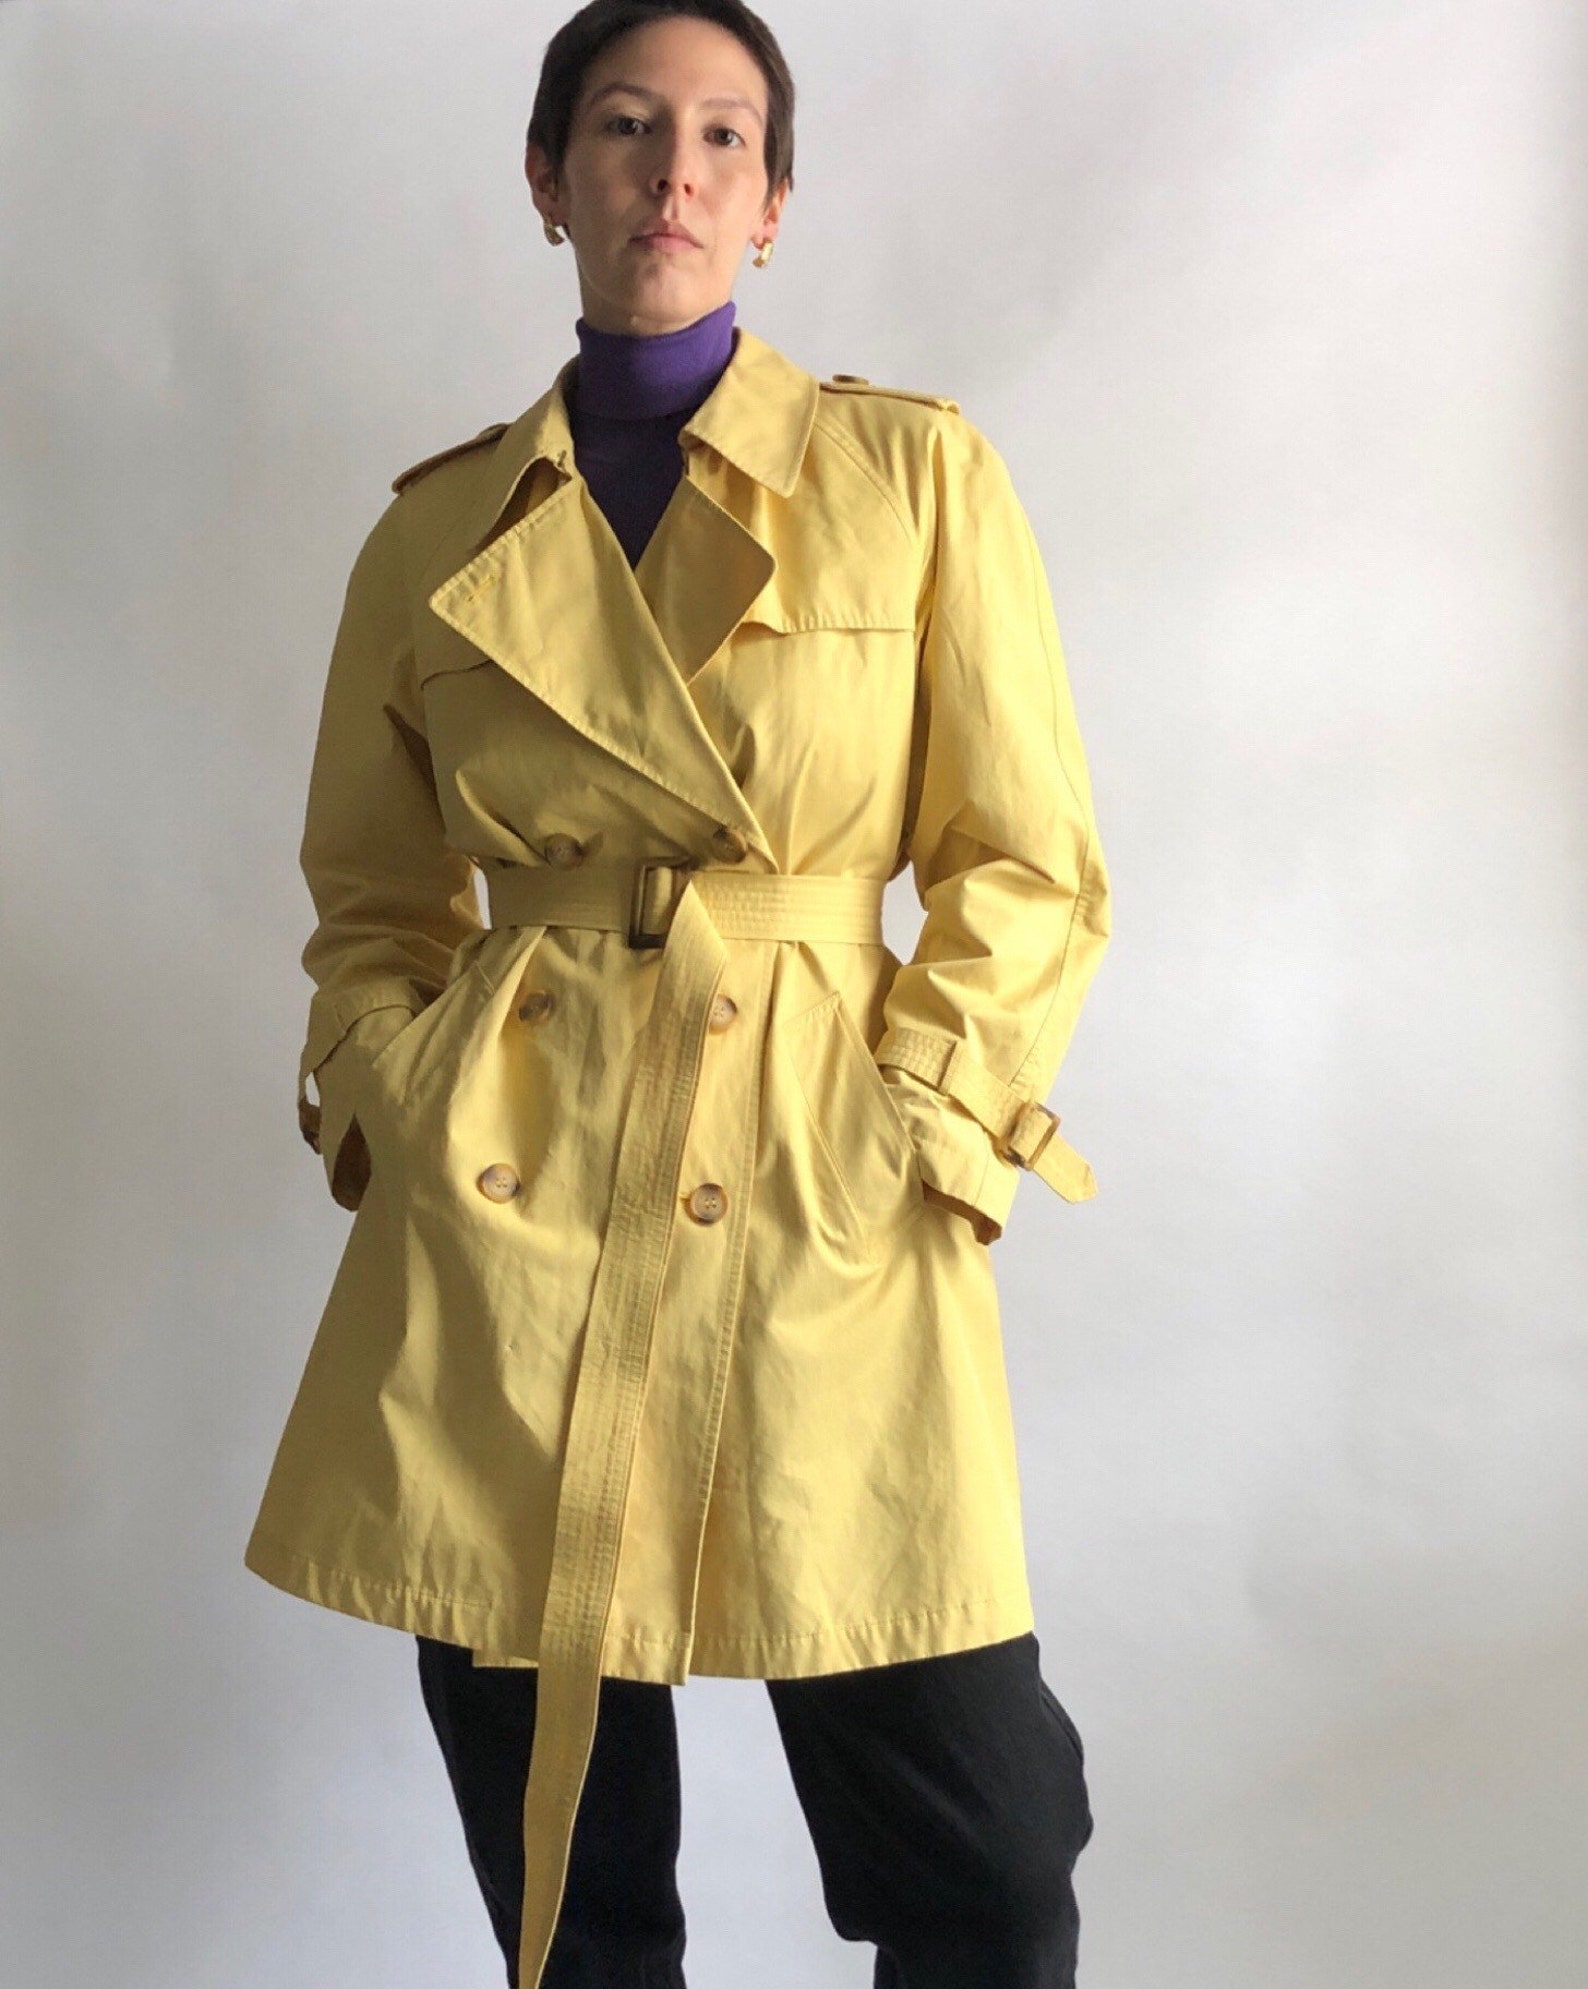 Vintage yellow 90s short trench coat by Talbots | Etsy